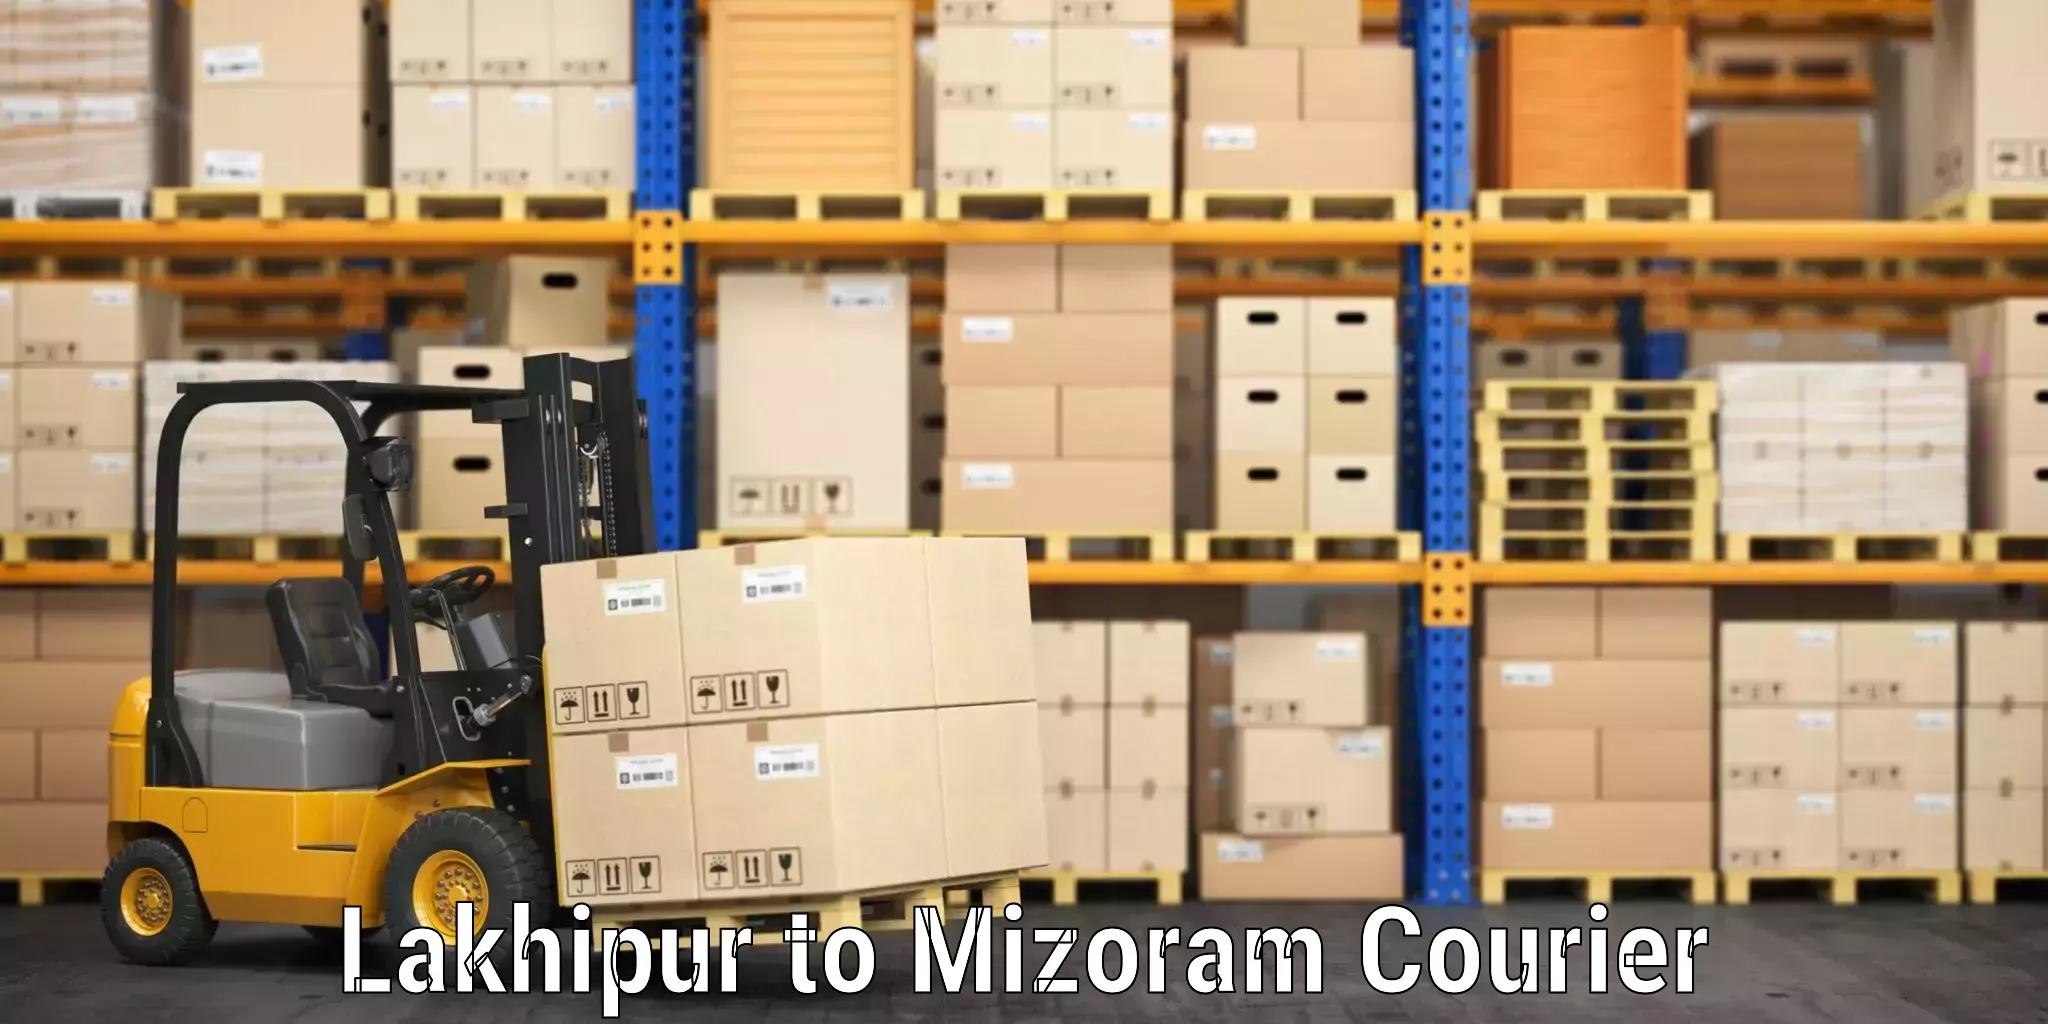 Luggage delivery network Lakhipur to Mizoram